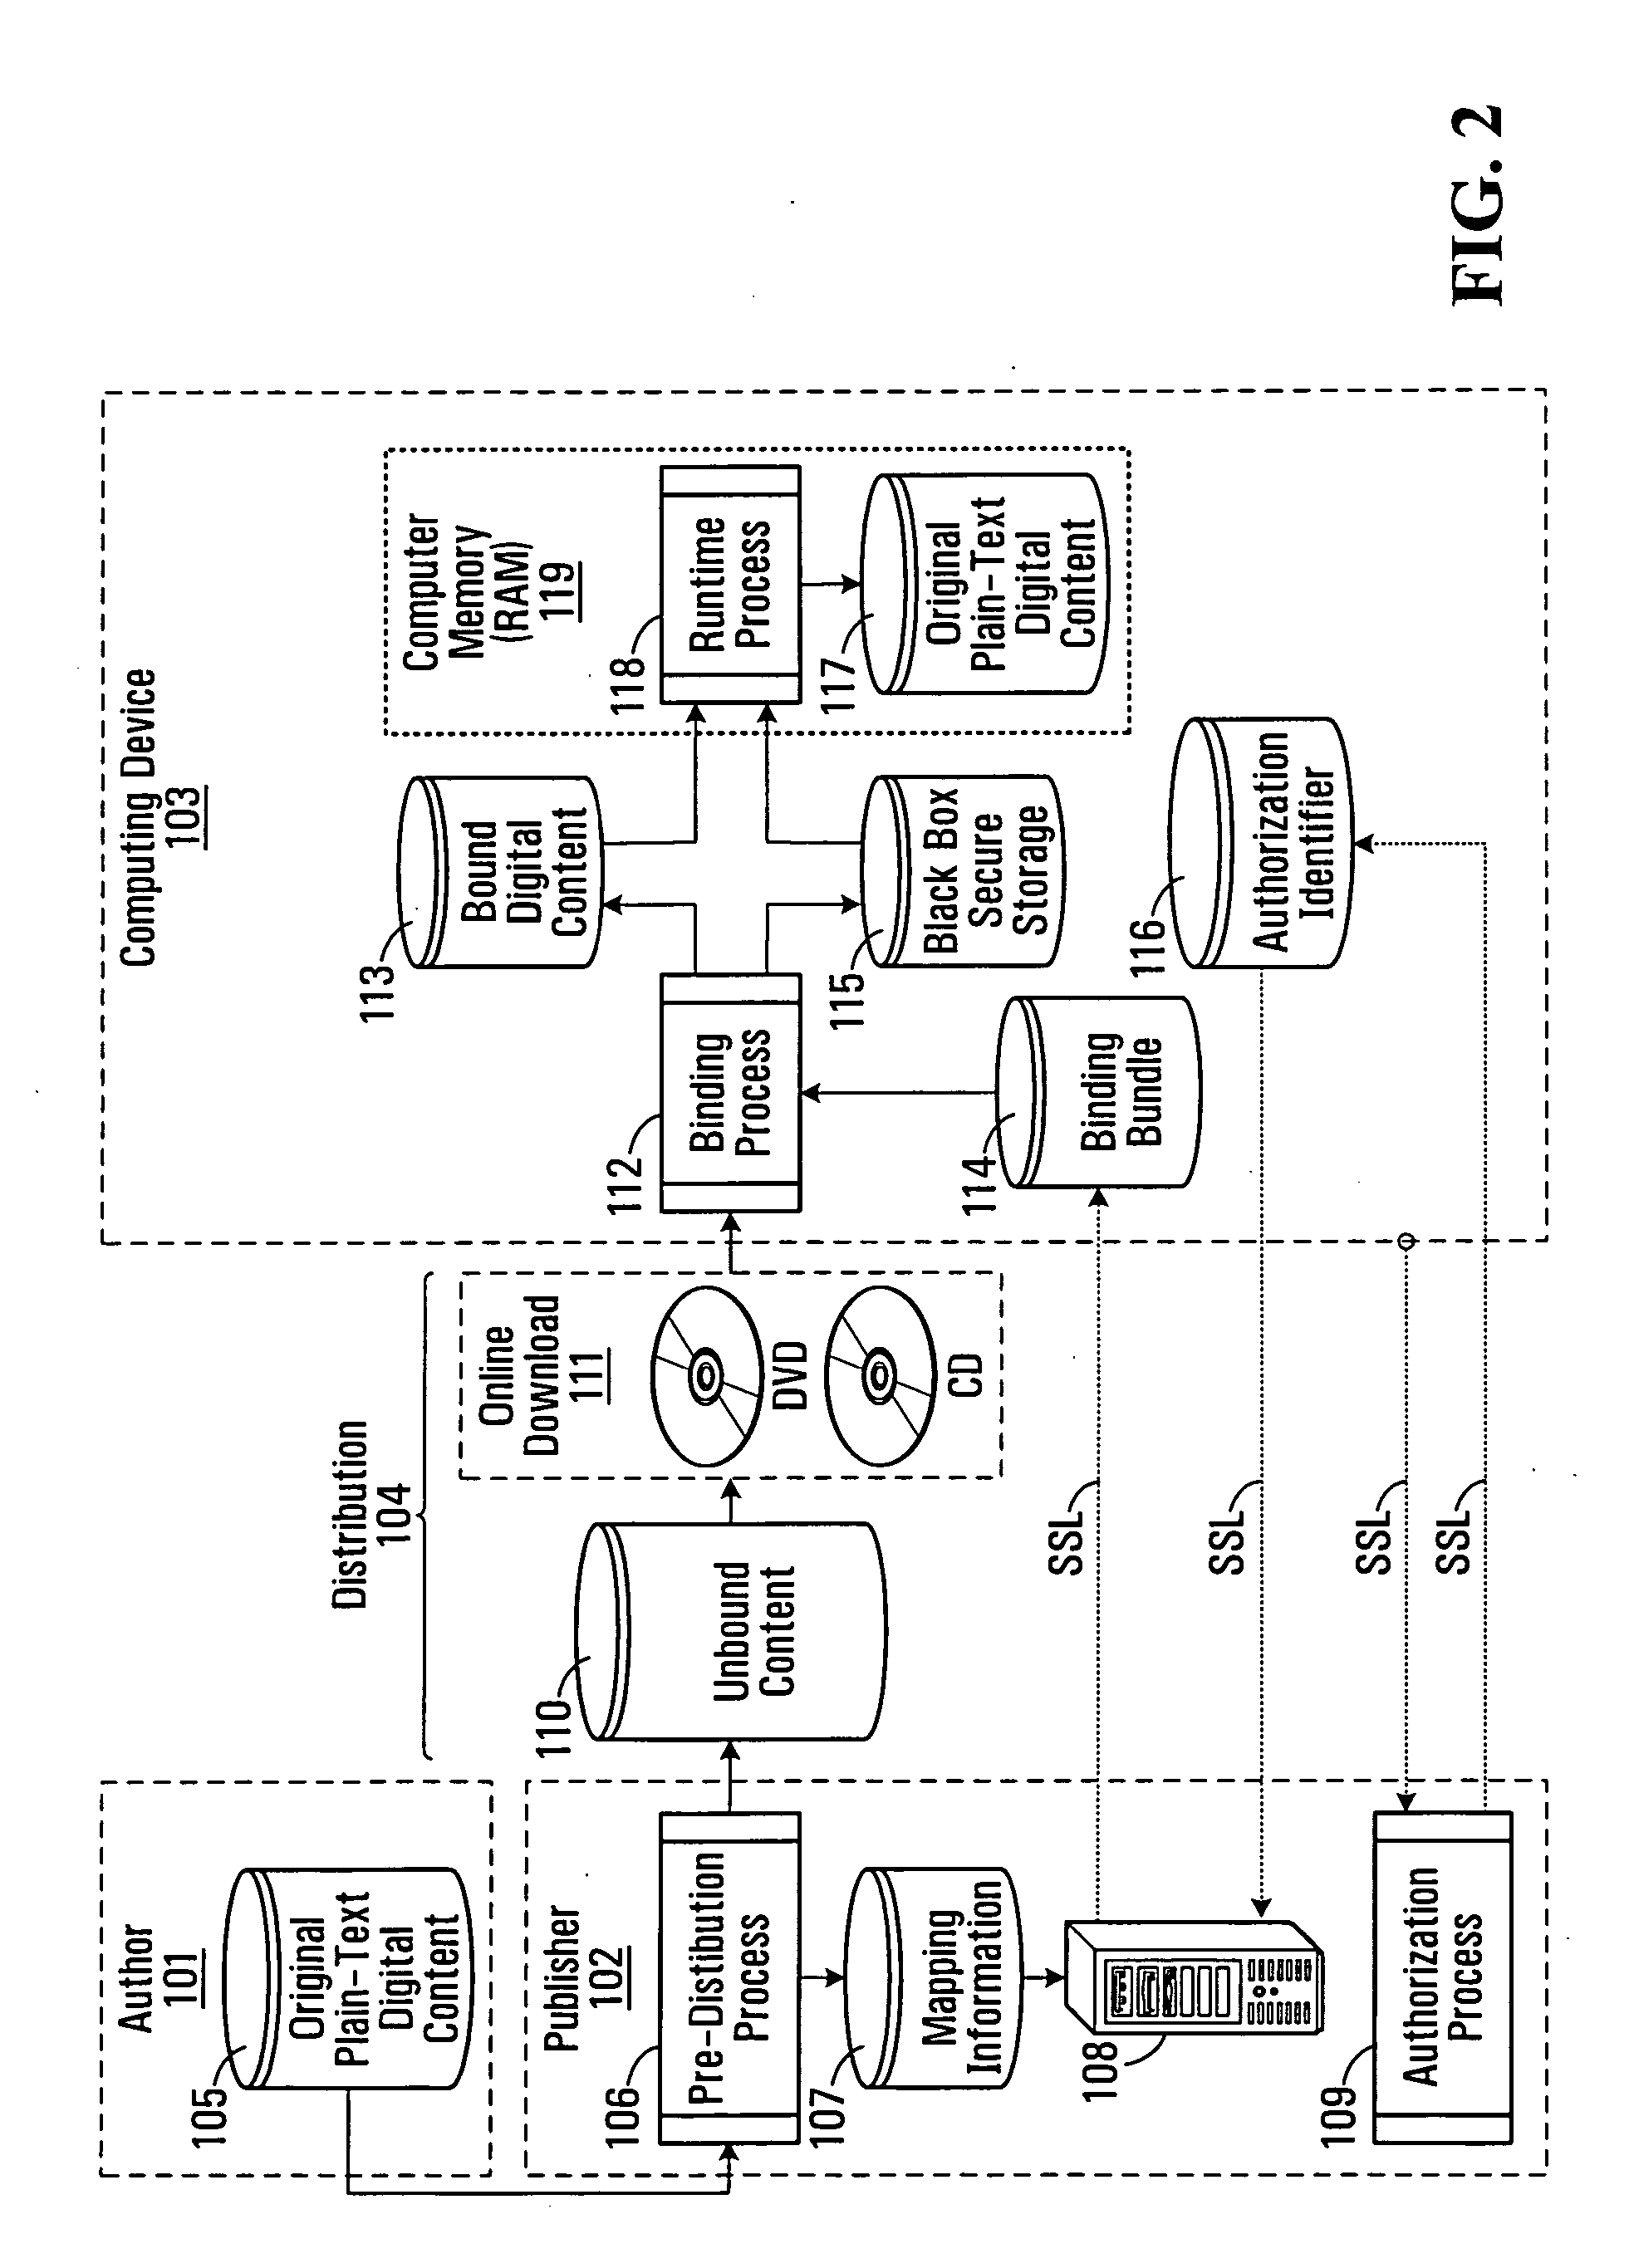 System and method for preventing unauthorized use of digital works